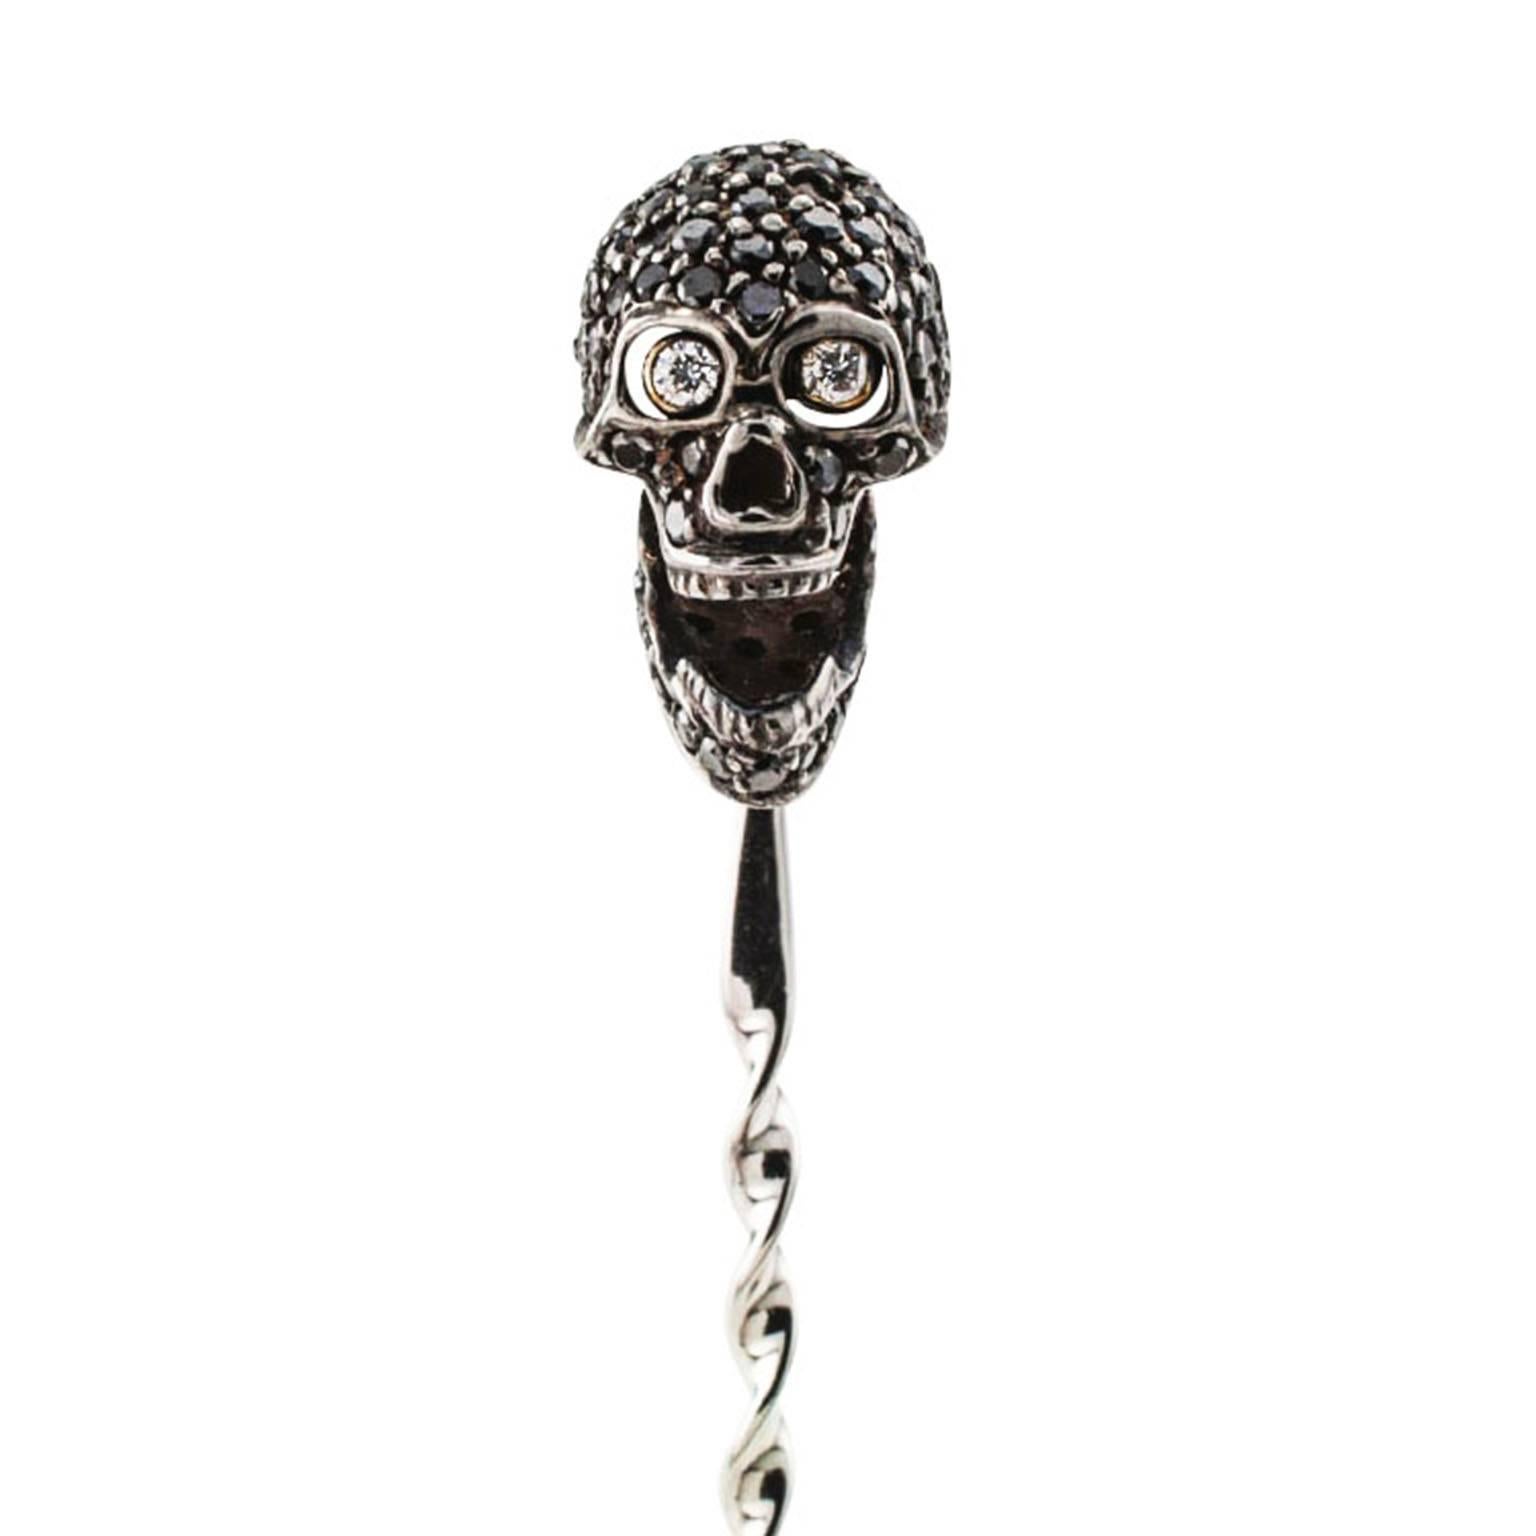 Black Diamond Skull Stick Pin

A macabre and whimsical conversation piece... icebreaker.  The yellow gold bezel-set white diamond eyes pop when the articulated jaw is open and they literally disappear when the jaw is closed.  Have fun.  18 karat